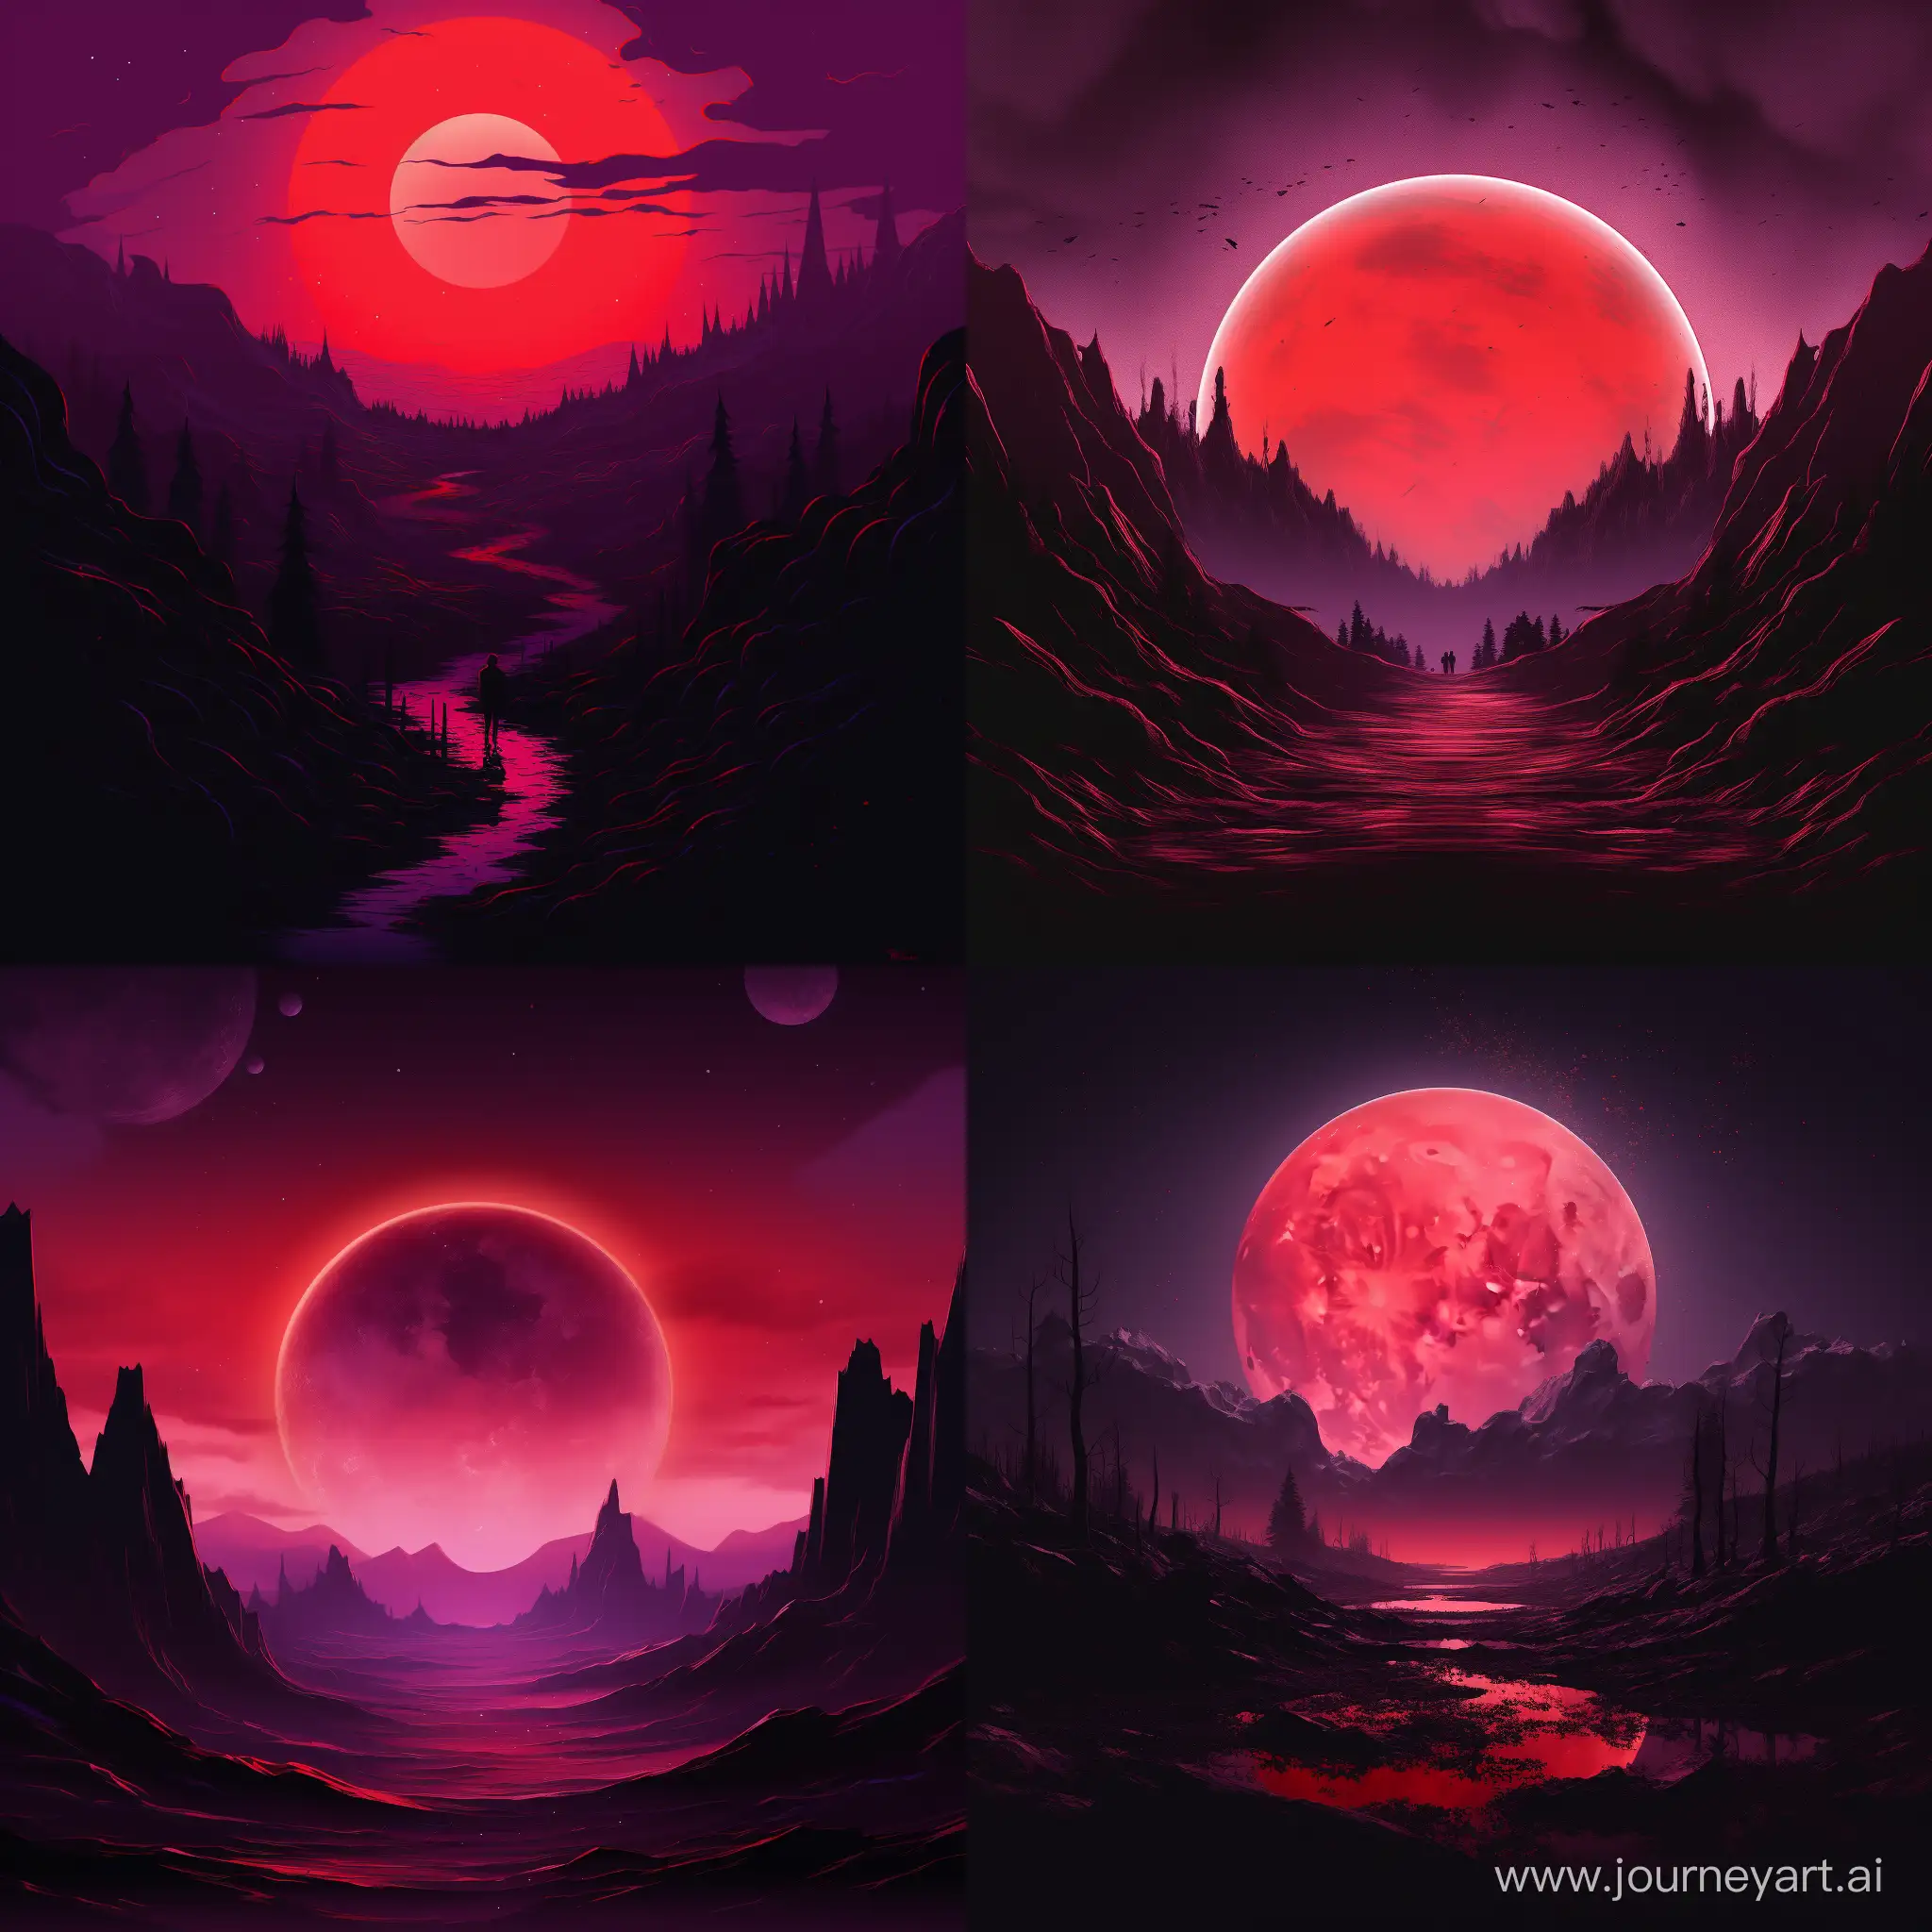 Dark and aesthetic movie themed Red/Purple colored background with the moon in the background.